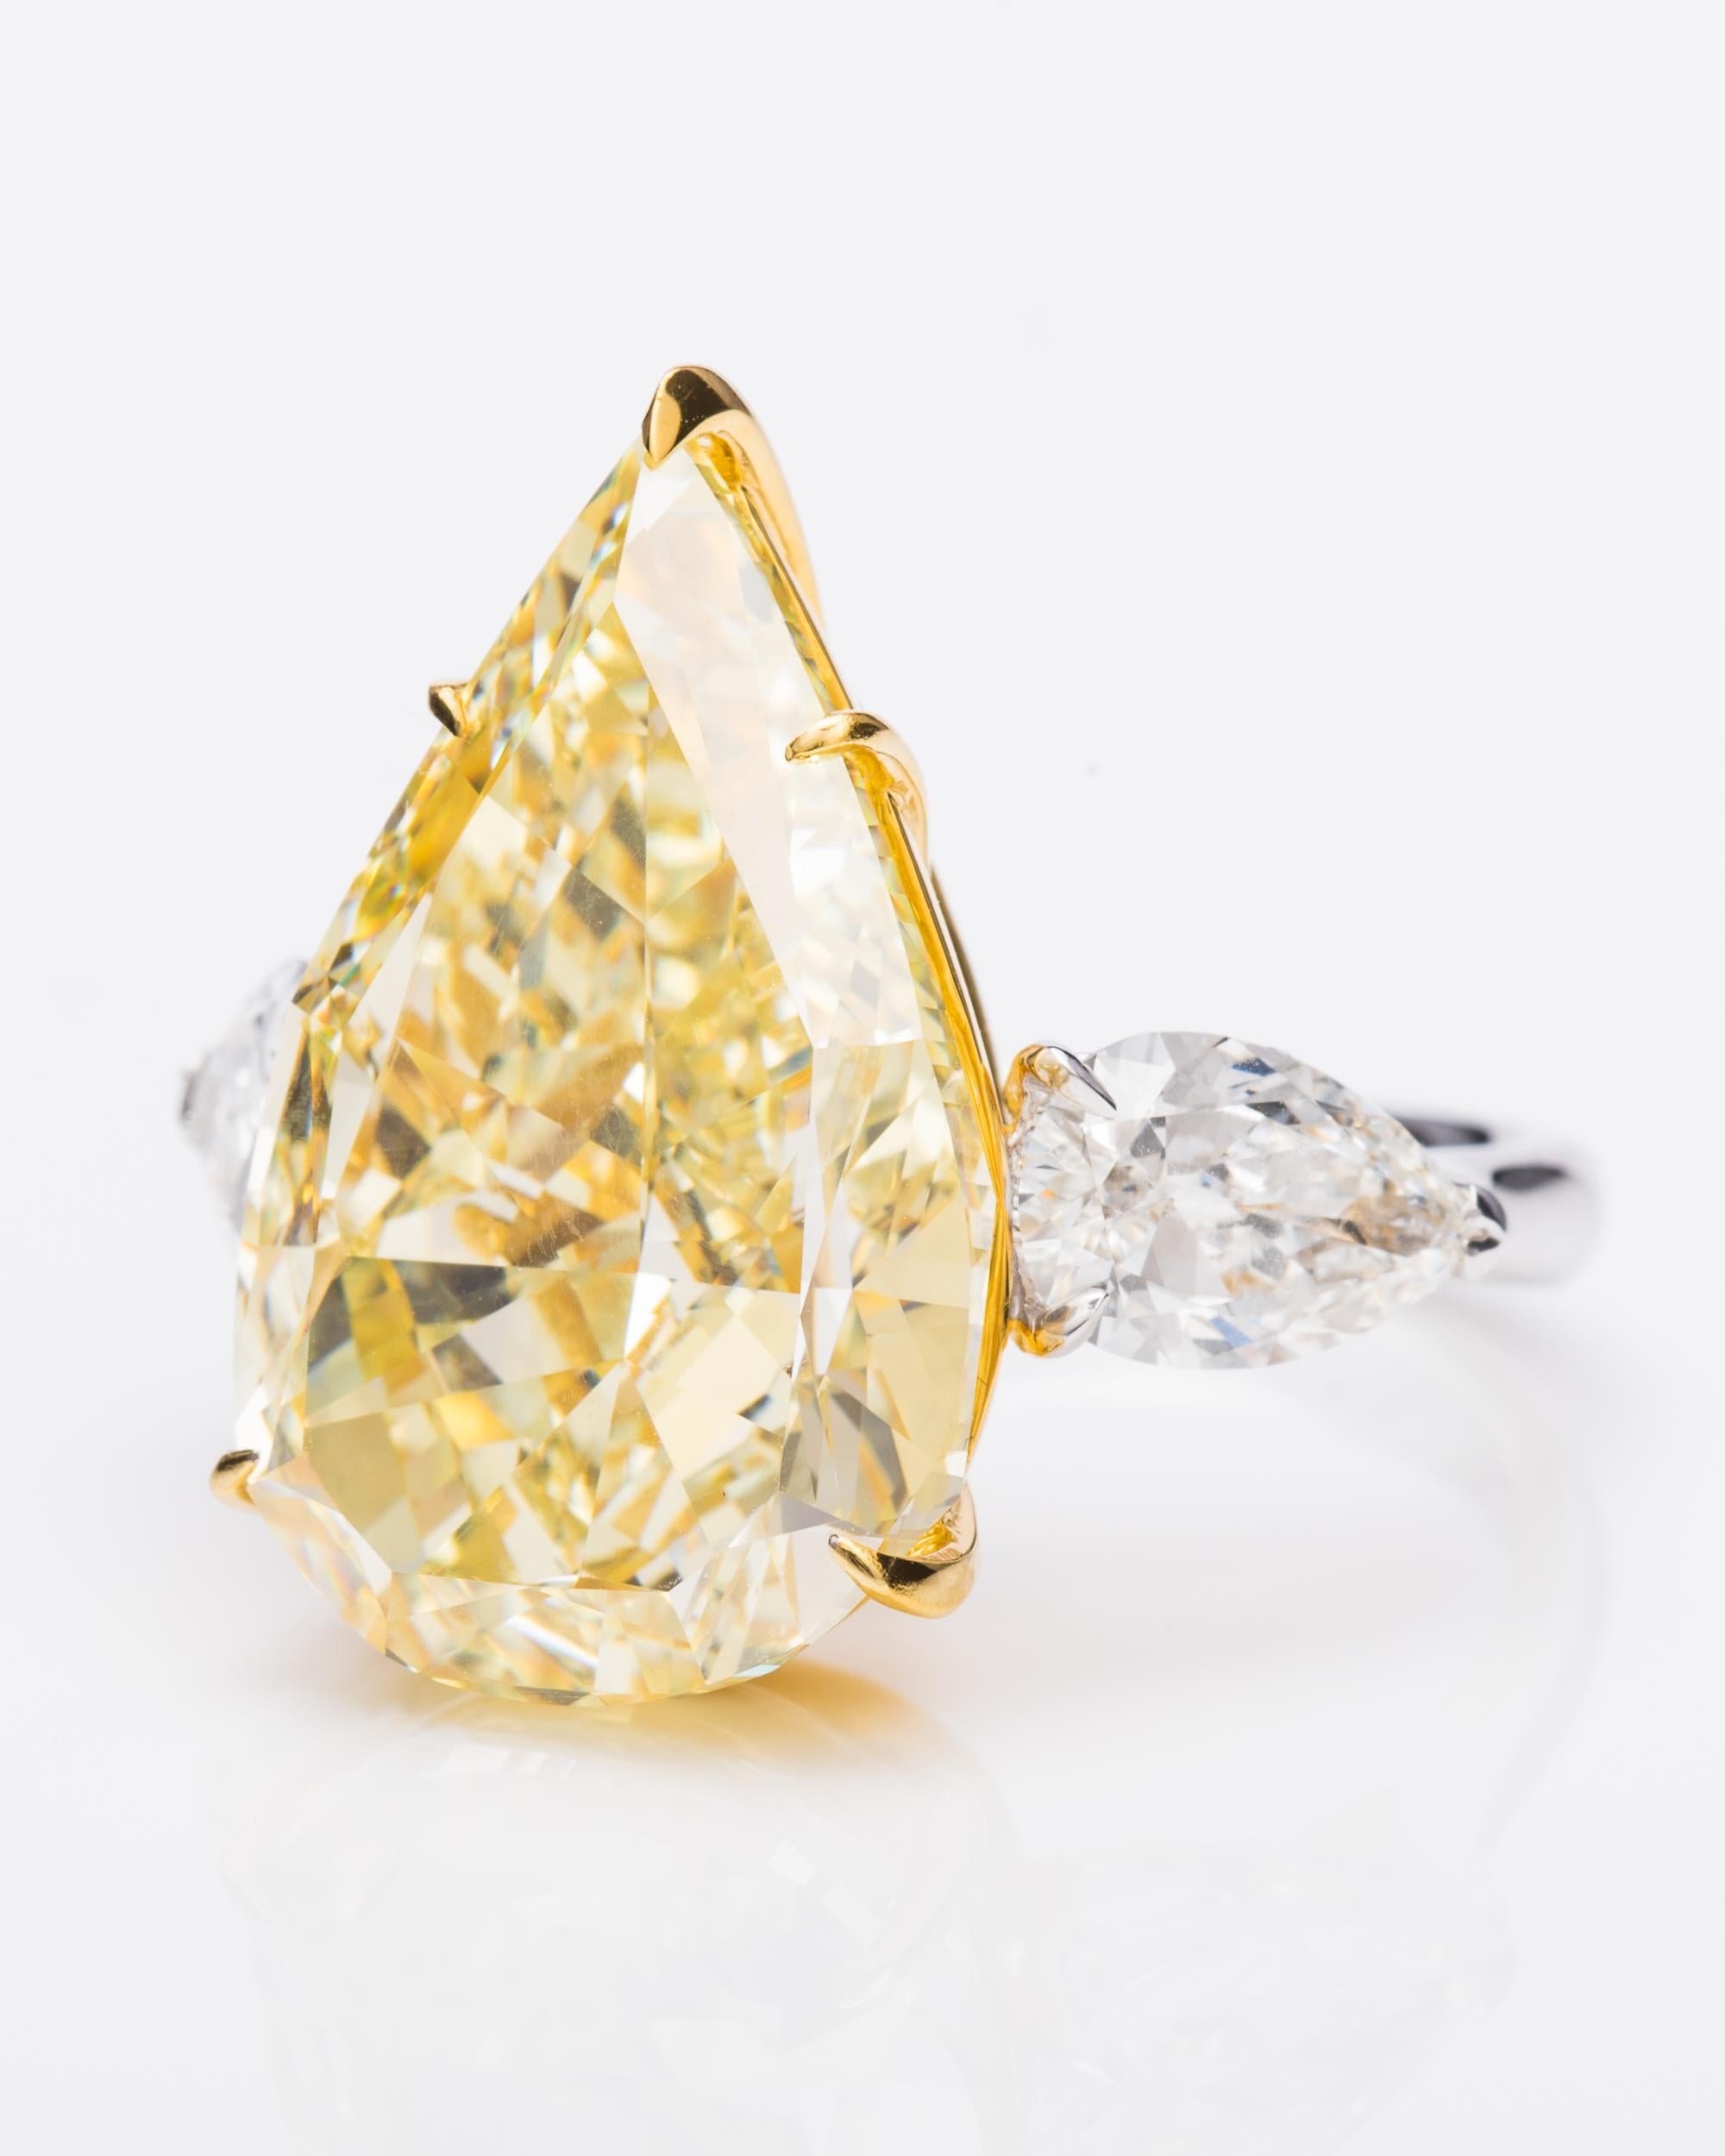 This piece is available for custom order only. 

Few shapes are as elegant and delicate than the pear shape. Vihari Jewels designed this 13.50 carat Fancy Yellow Diamond (GIA Certificate #2181120671) for a discerning collector with a refined taste.